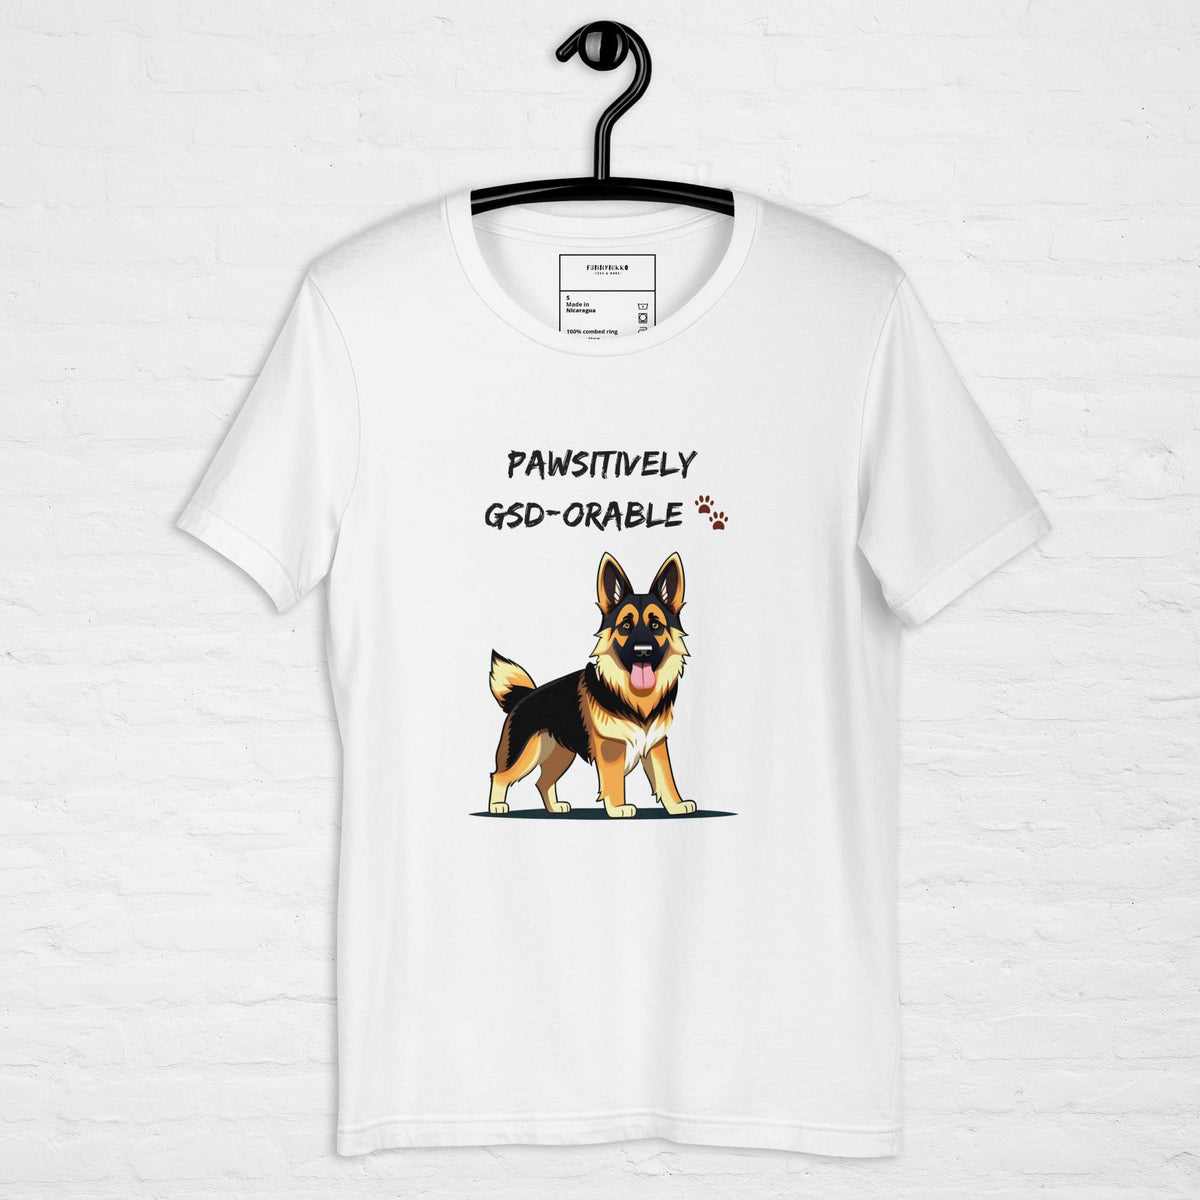 Pawsitively GSD-orable Tee